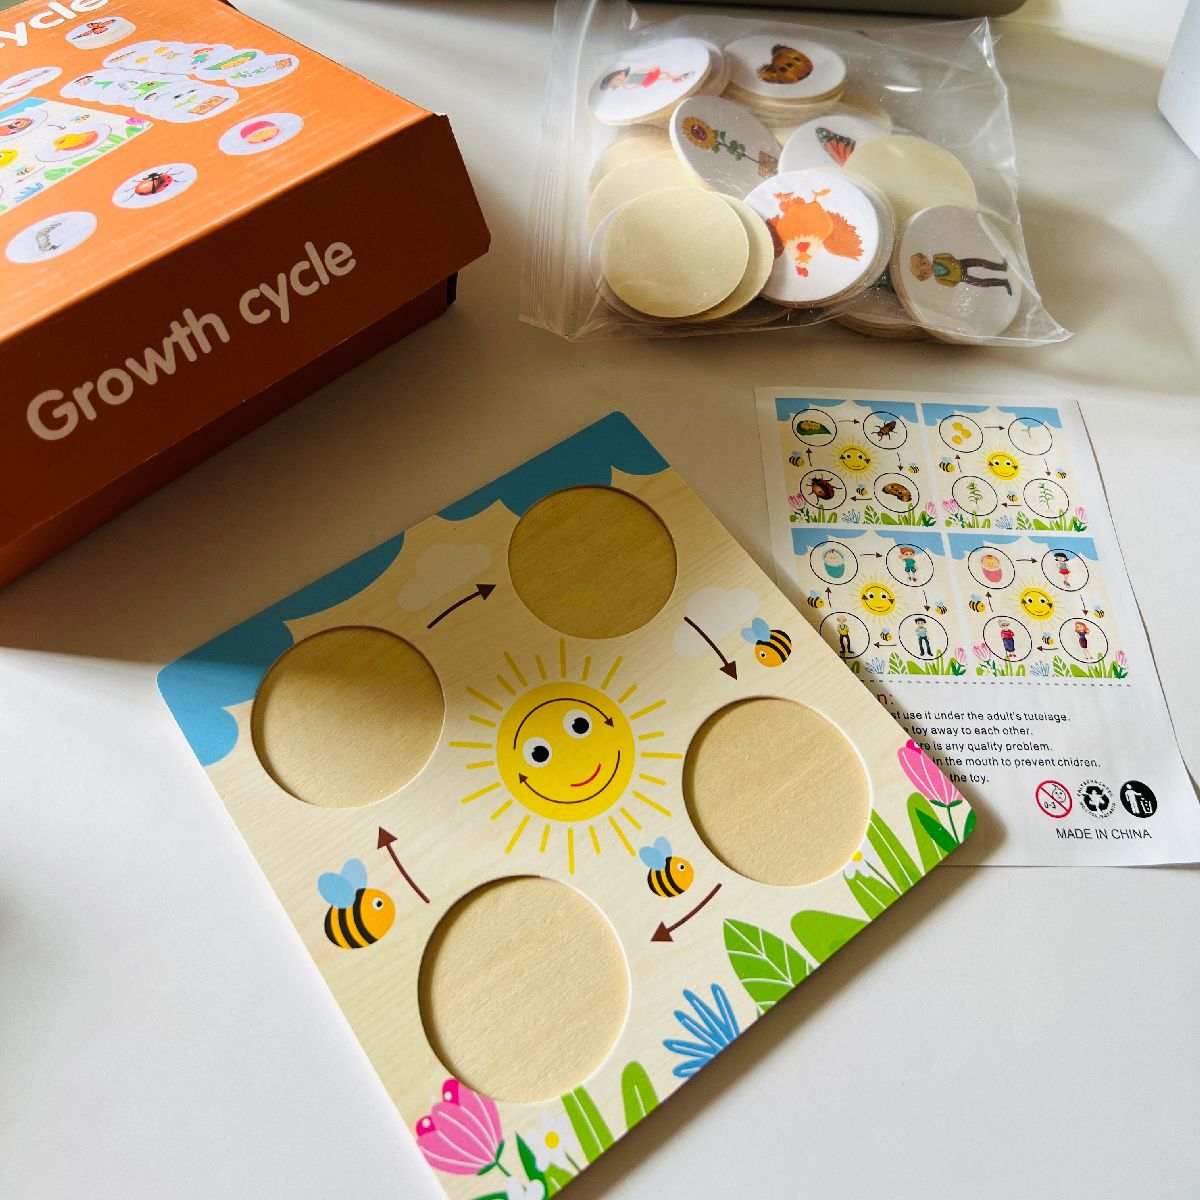 Growth Cycle Adventures Puzzle Set